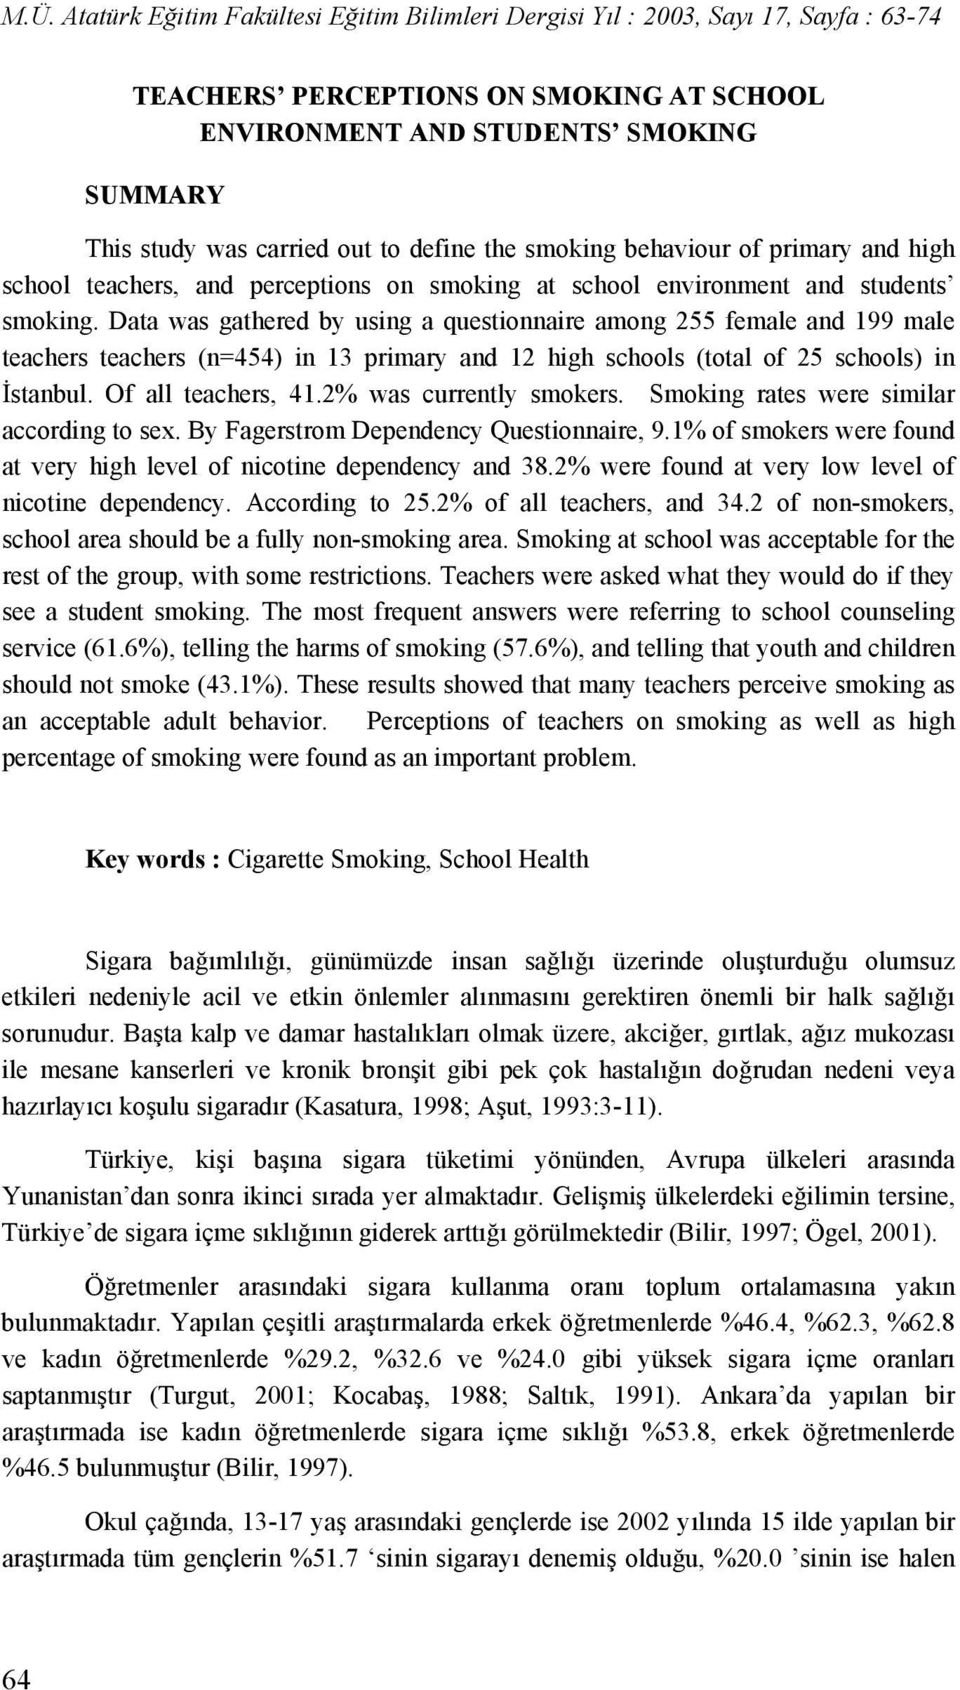 Data was gathered by using a questionnaire among 255 female and 199 male teachers teachers (n=454) in 13 primary and 12 high schools (total of 25 schools) in İstanbul. Of all teachers, 41.